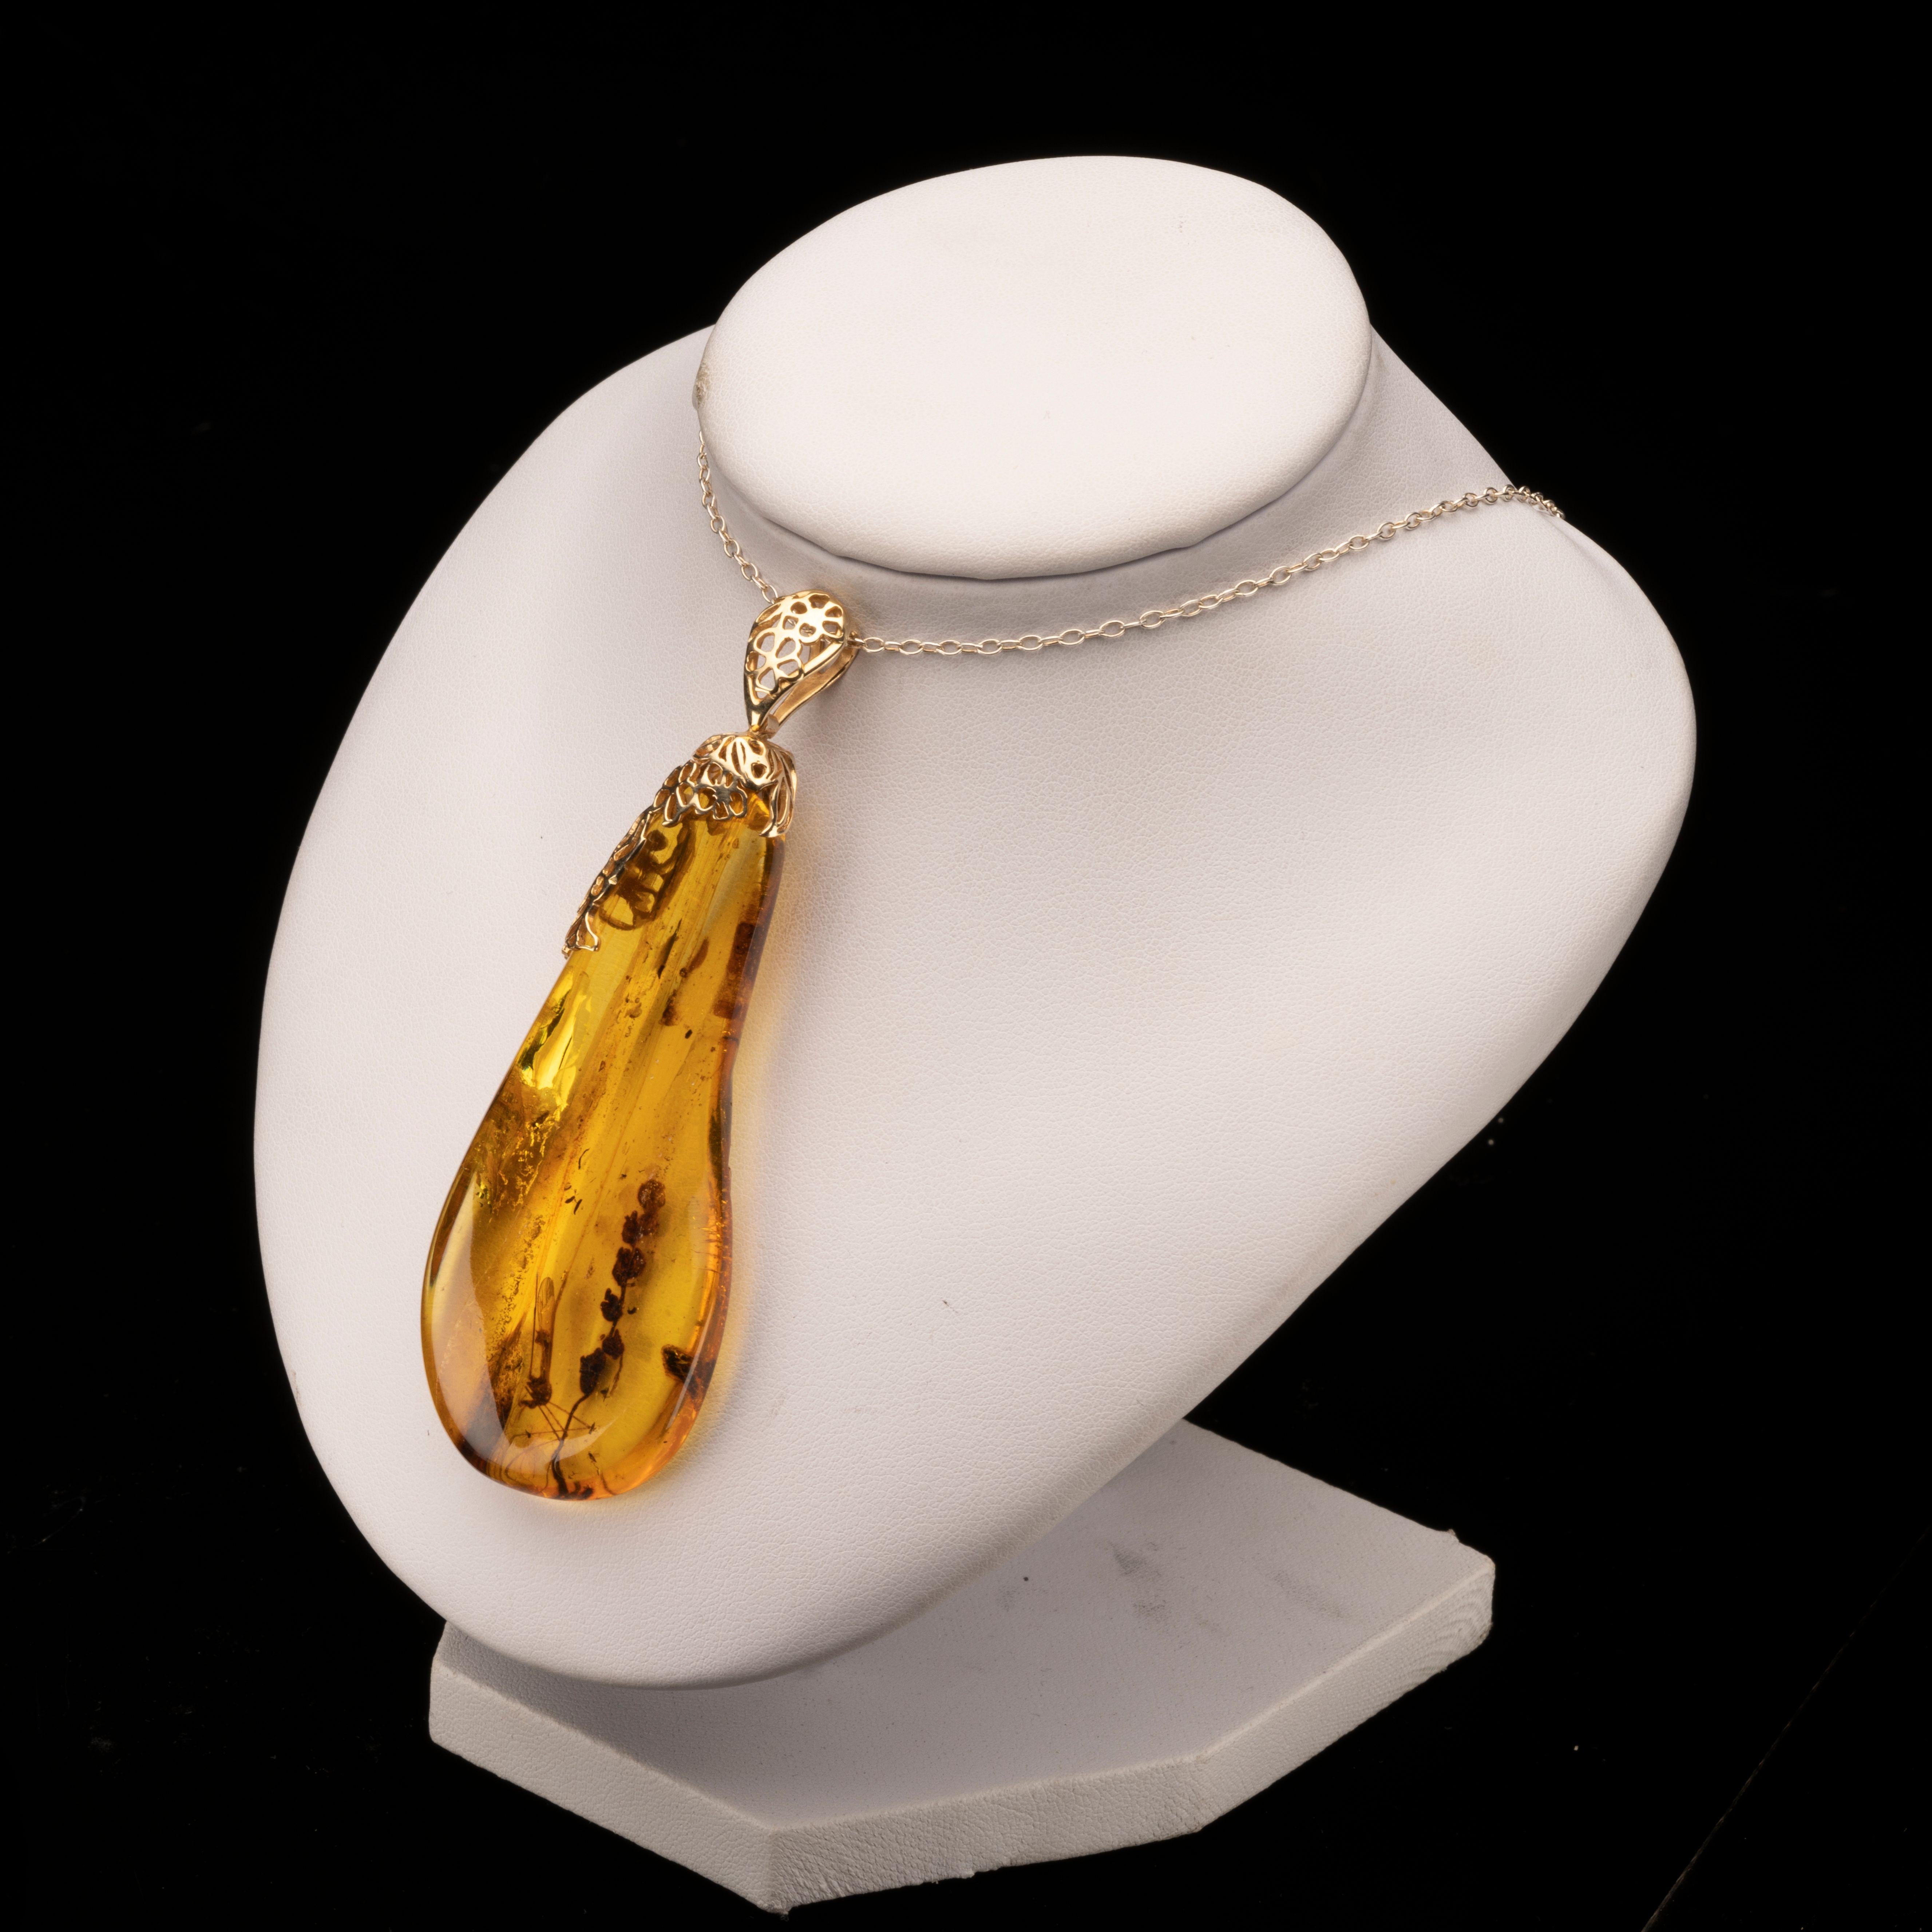 This piece of Baltic amber features incredible color and clarity and boasts preserved plants and insects including at least one completely visible mosquito. Polished to a handsome luster, the specimen has been made into a pendant with an intricately